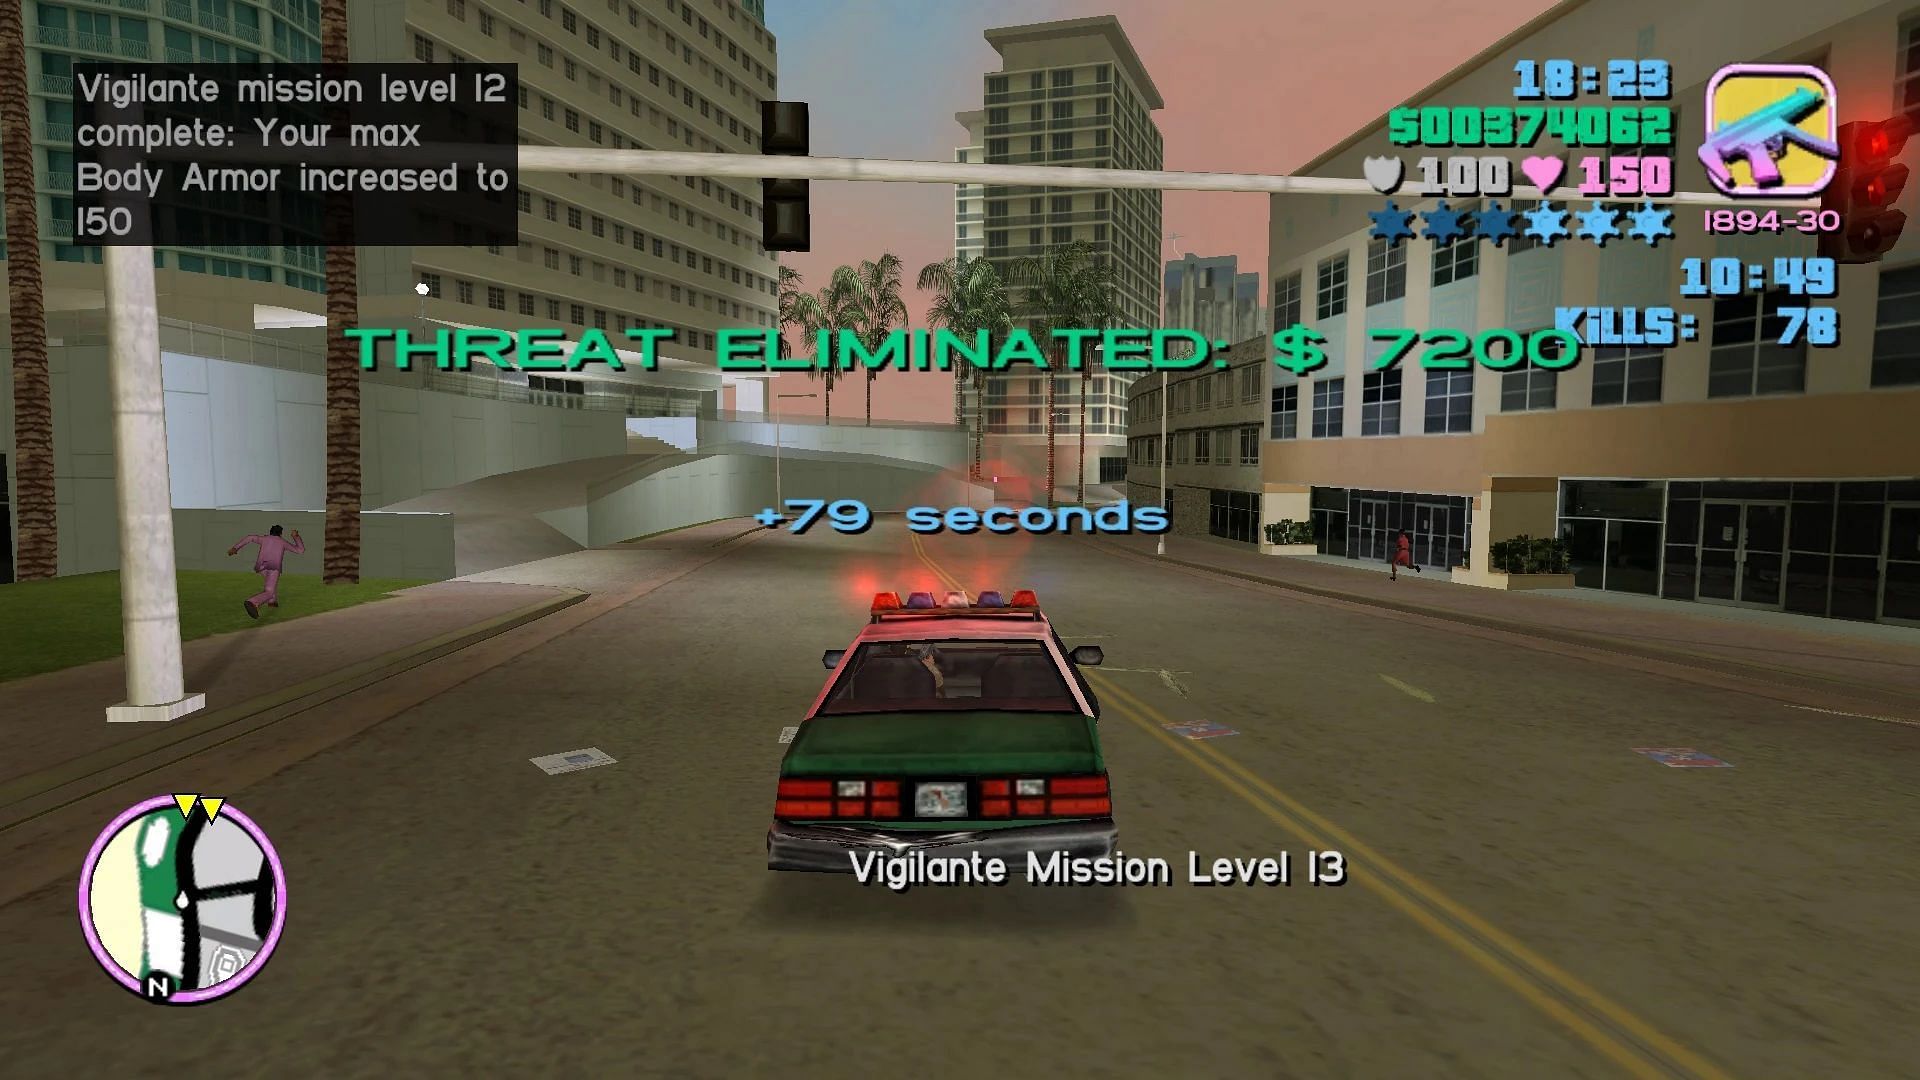 Fans want Vigilante missions to be back (Image via GTA Wiki/Himerosteam)